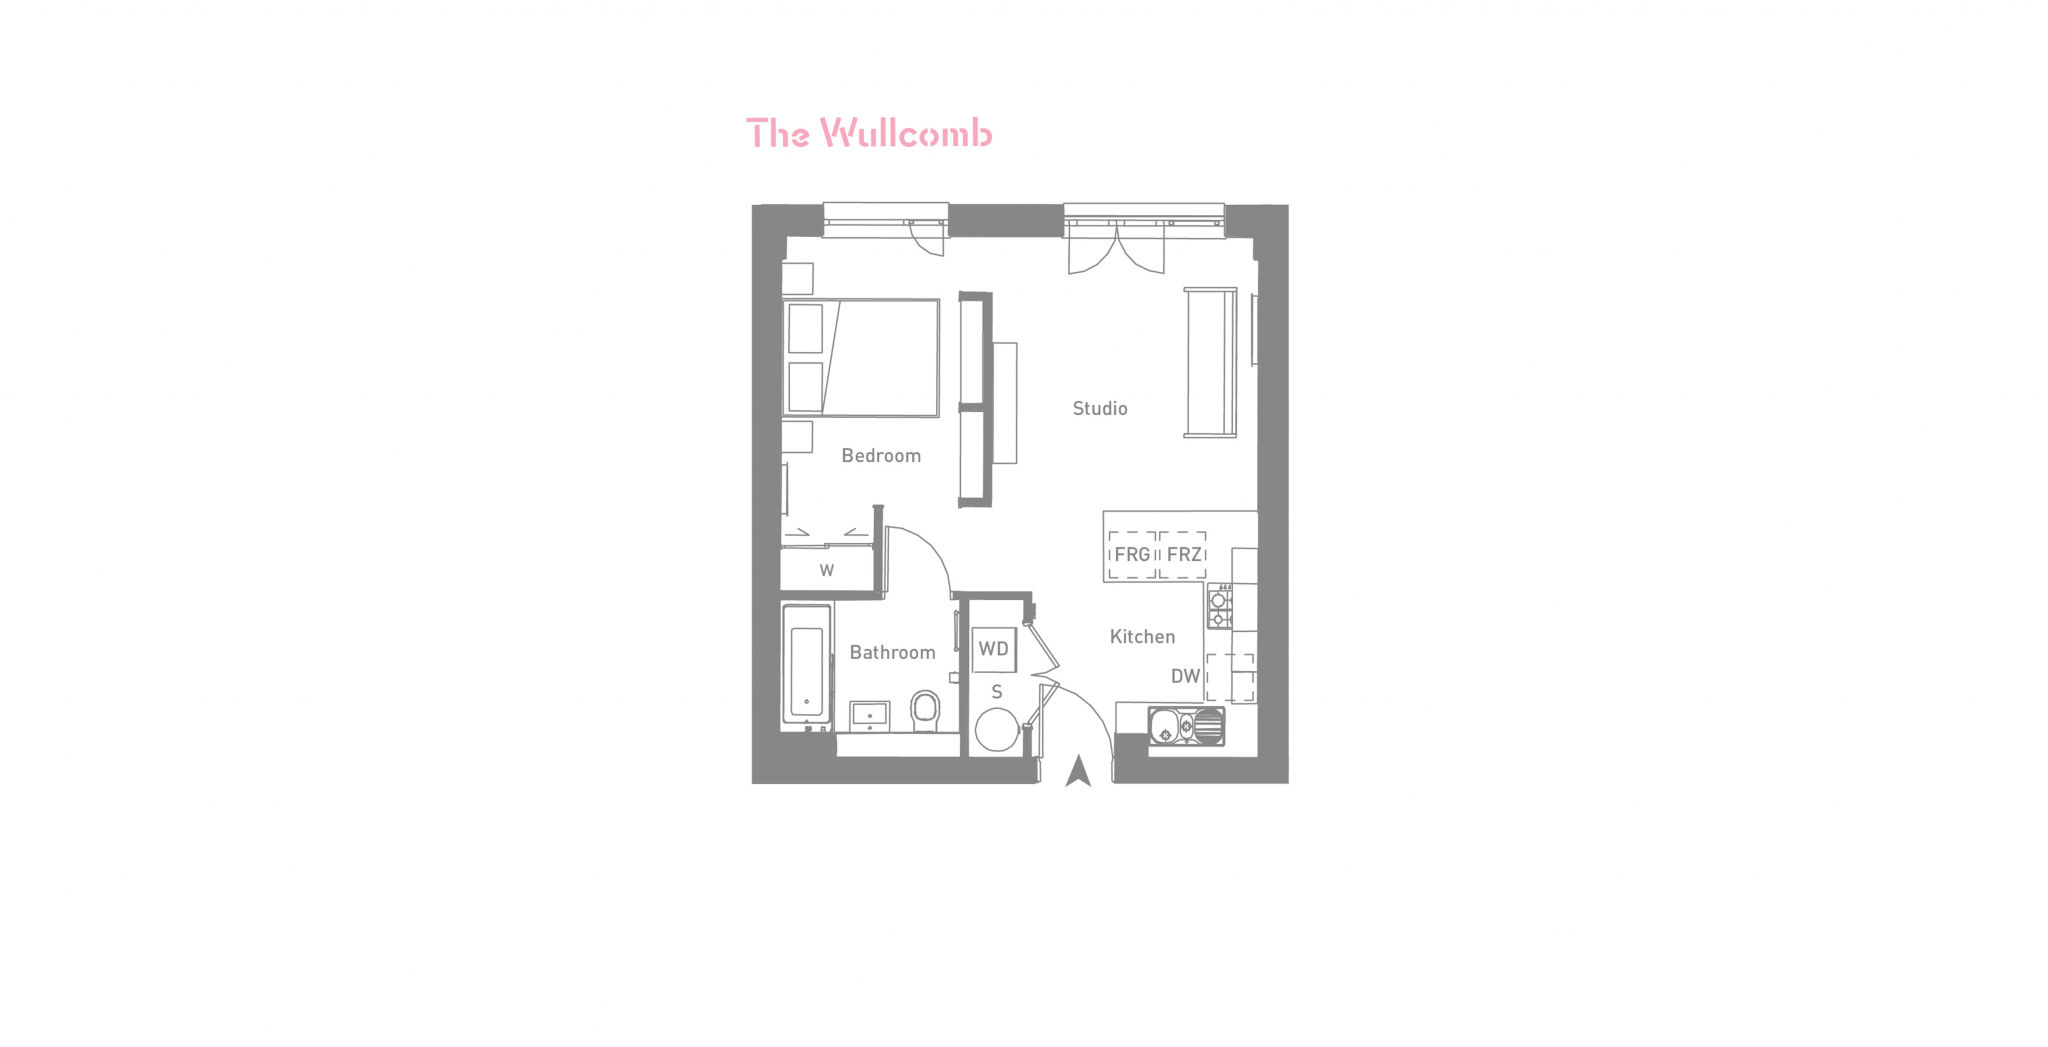 Listing image of The Wullcomb, LE1